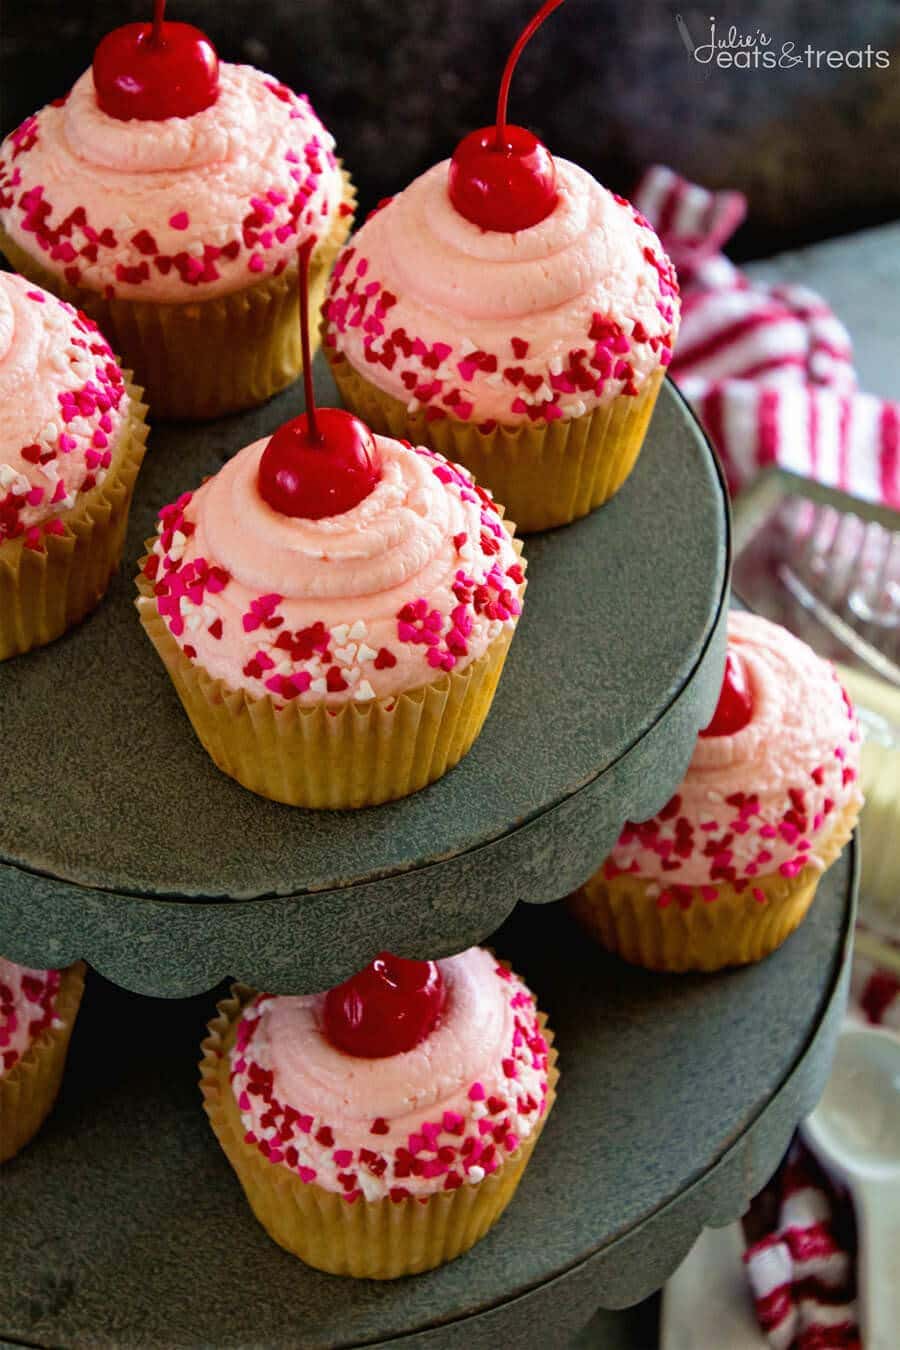 Cherry Almond Cupcakes ~ Light & Fluffy Almond Cupcakes Topped with Cherry Frosting! Perfect for Holidays, Birthdays or Just Because!